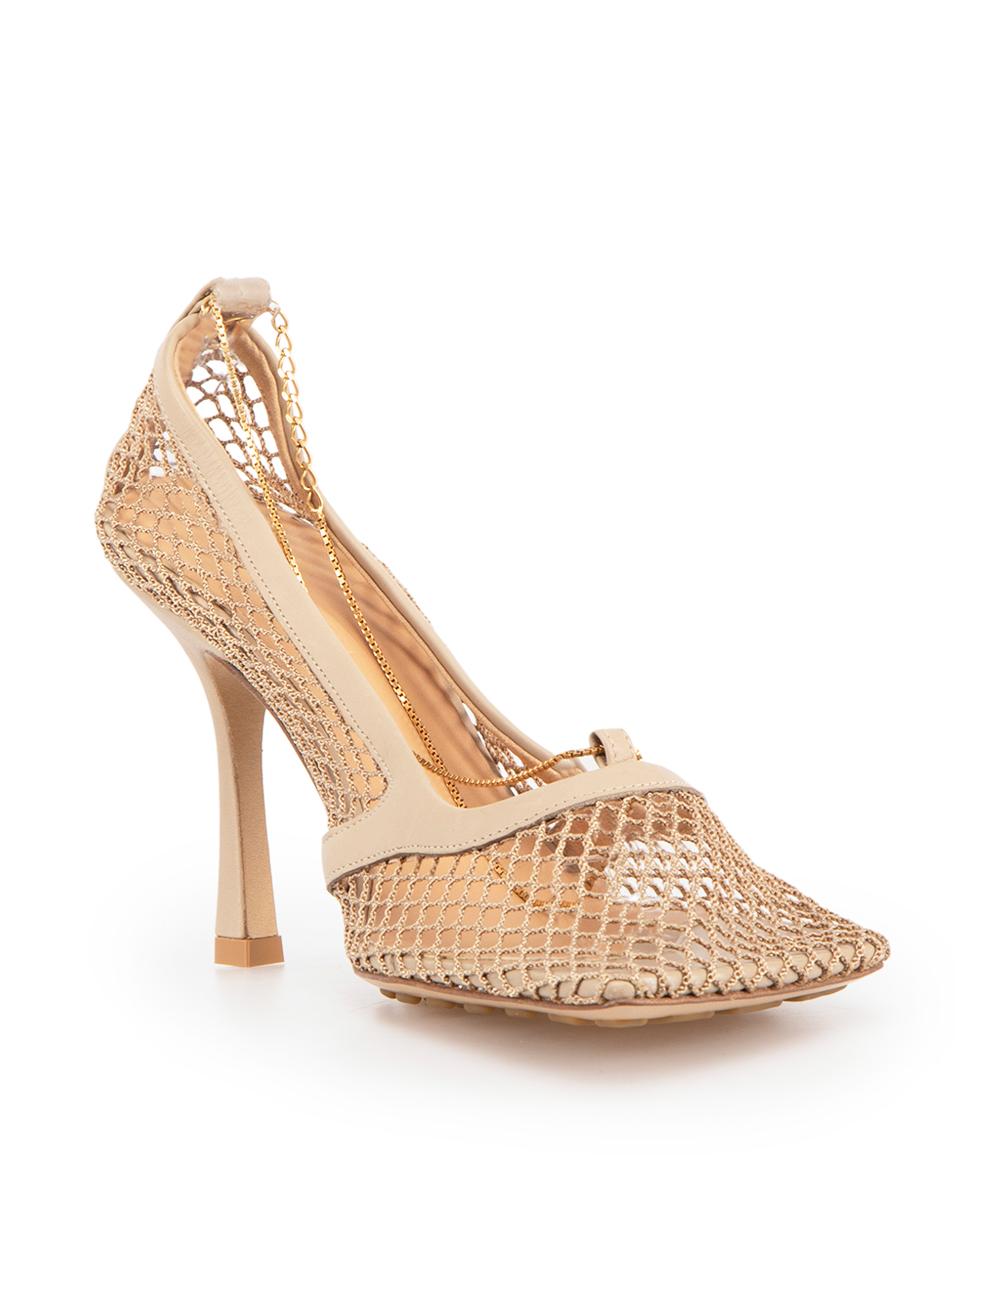 CONDITION is Very good. Minimal wear to shoes is evident. Minimal wear seen with only negligible abrasion to the insole edge found on this used Bottega Veneta designer resale item.
 
 Details
 Stretch
 Beige
 Cloth
 Heels
 Mesh netting
 Leather